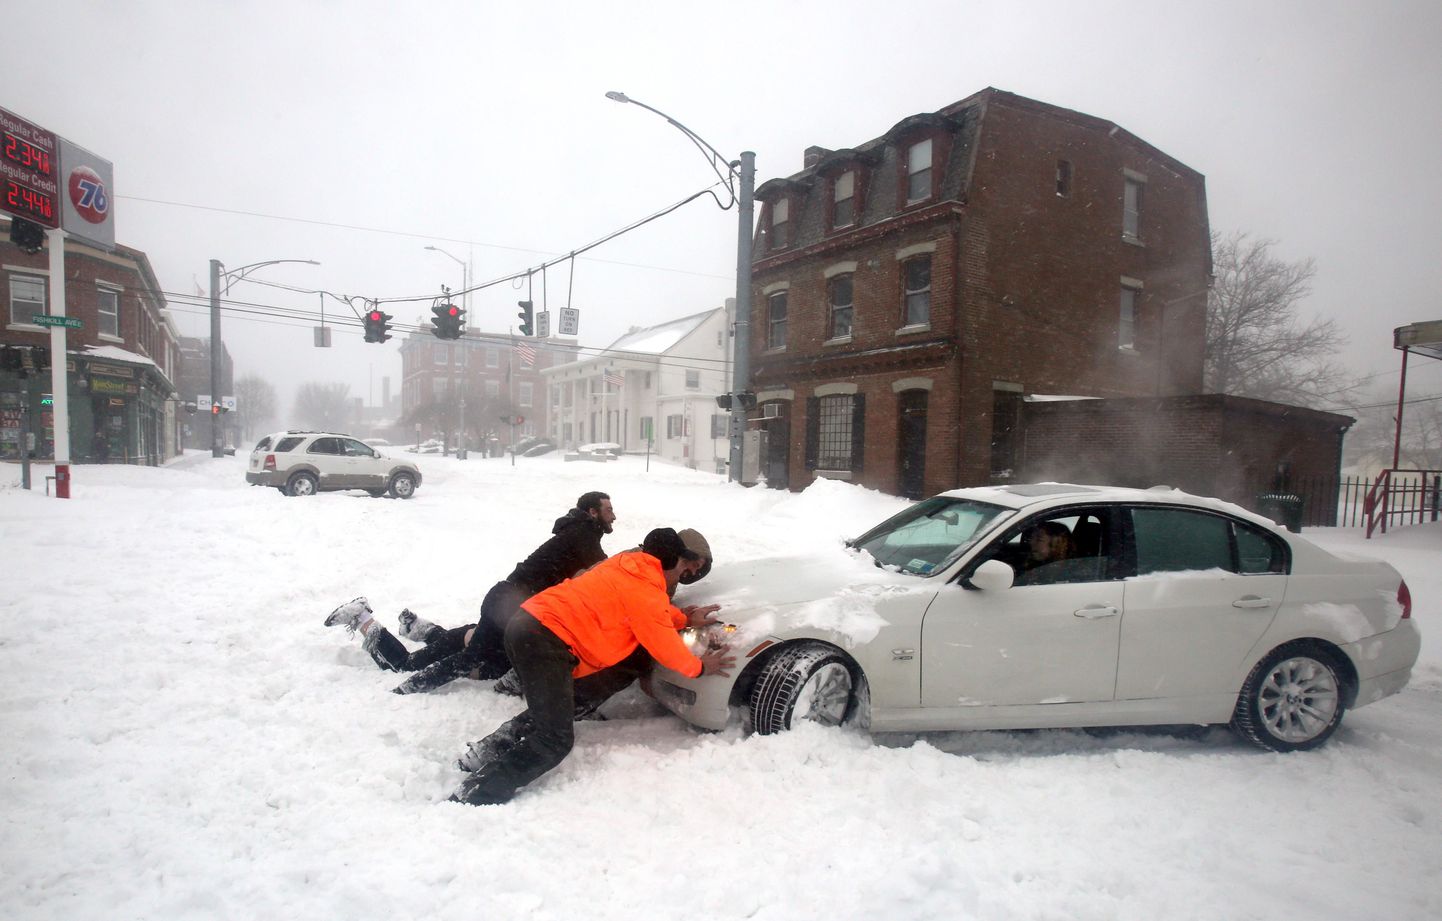 Mar 14, 2017; Beacon, NY, USA; Joelle Price of Poughkeepsie gets help after her car got stuck in snow on Main St. in Beacon, N.Y. during Winter Storm Stella. The late winter storm was expected to drop up to two feet of snow on the region throughout the day.  Mandatory Credit: Seth Harrison/The Poughkeepsie Journal via USA TODAY NETWORK *** Please Use Credit from Credit Field ***